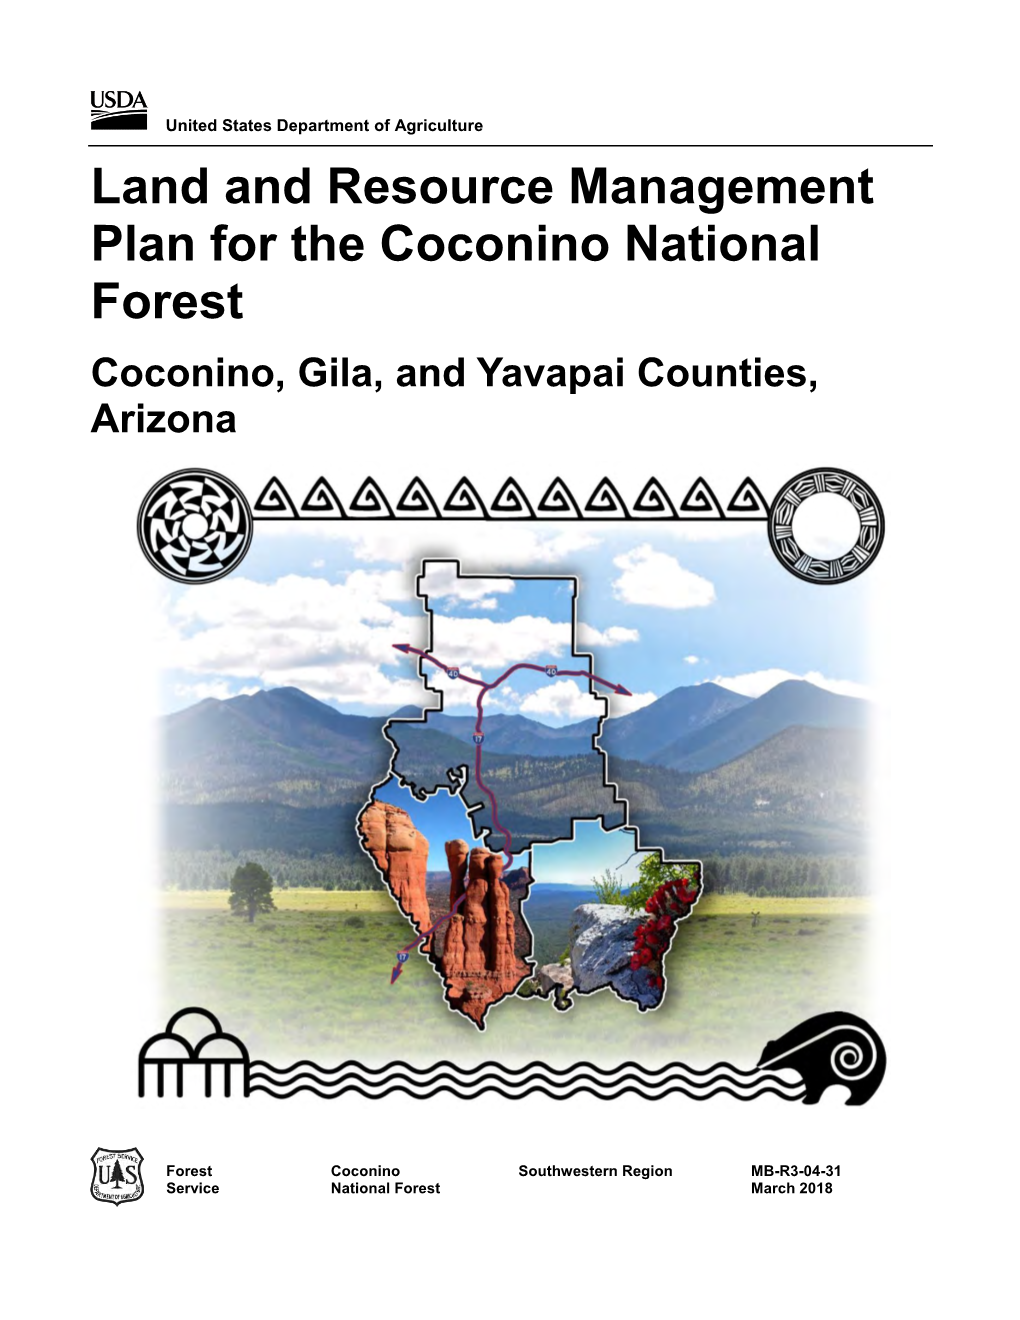 Land and Resource Management Plan for the Coconino National Forest Coconino, Gila, and Yavapai Counties, Arizona